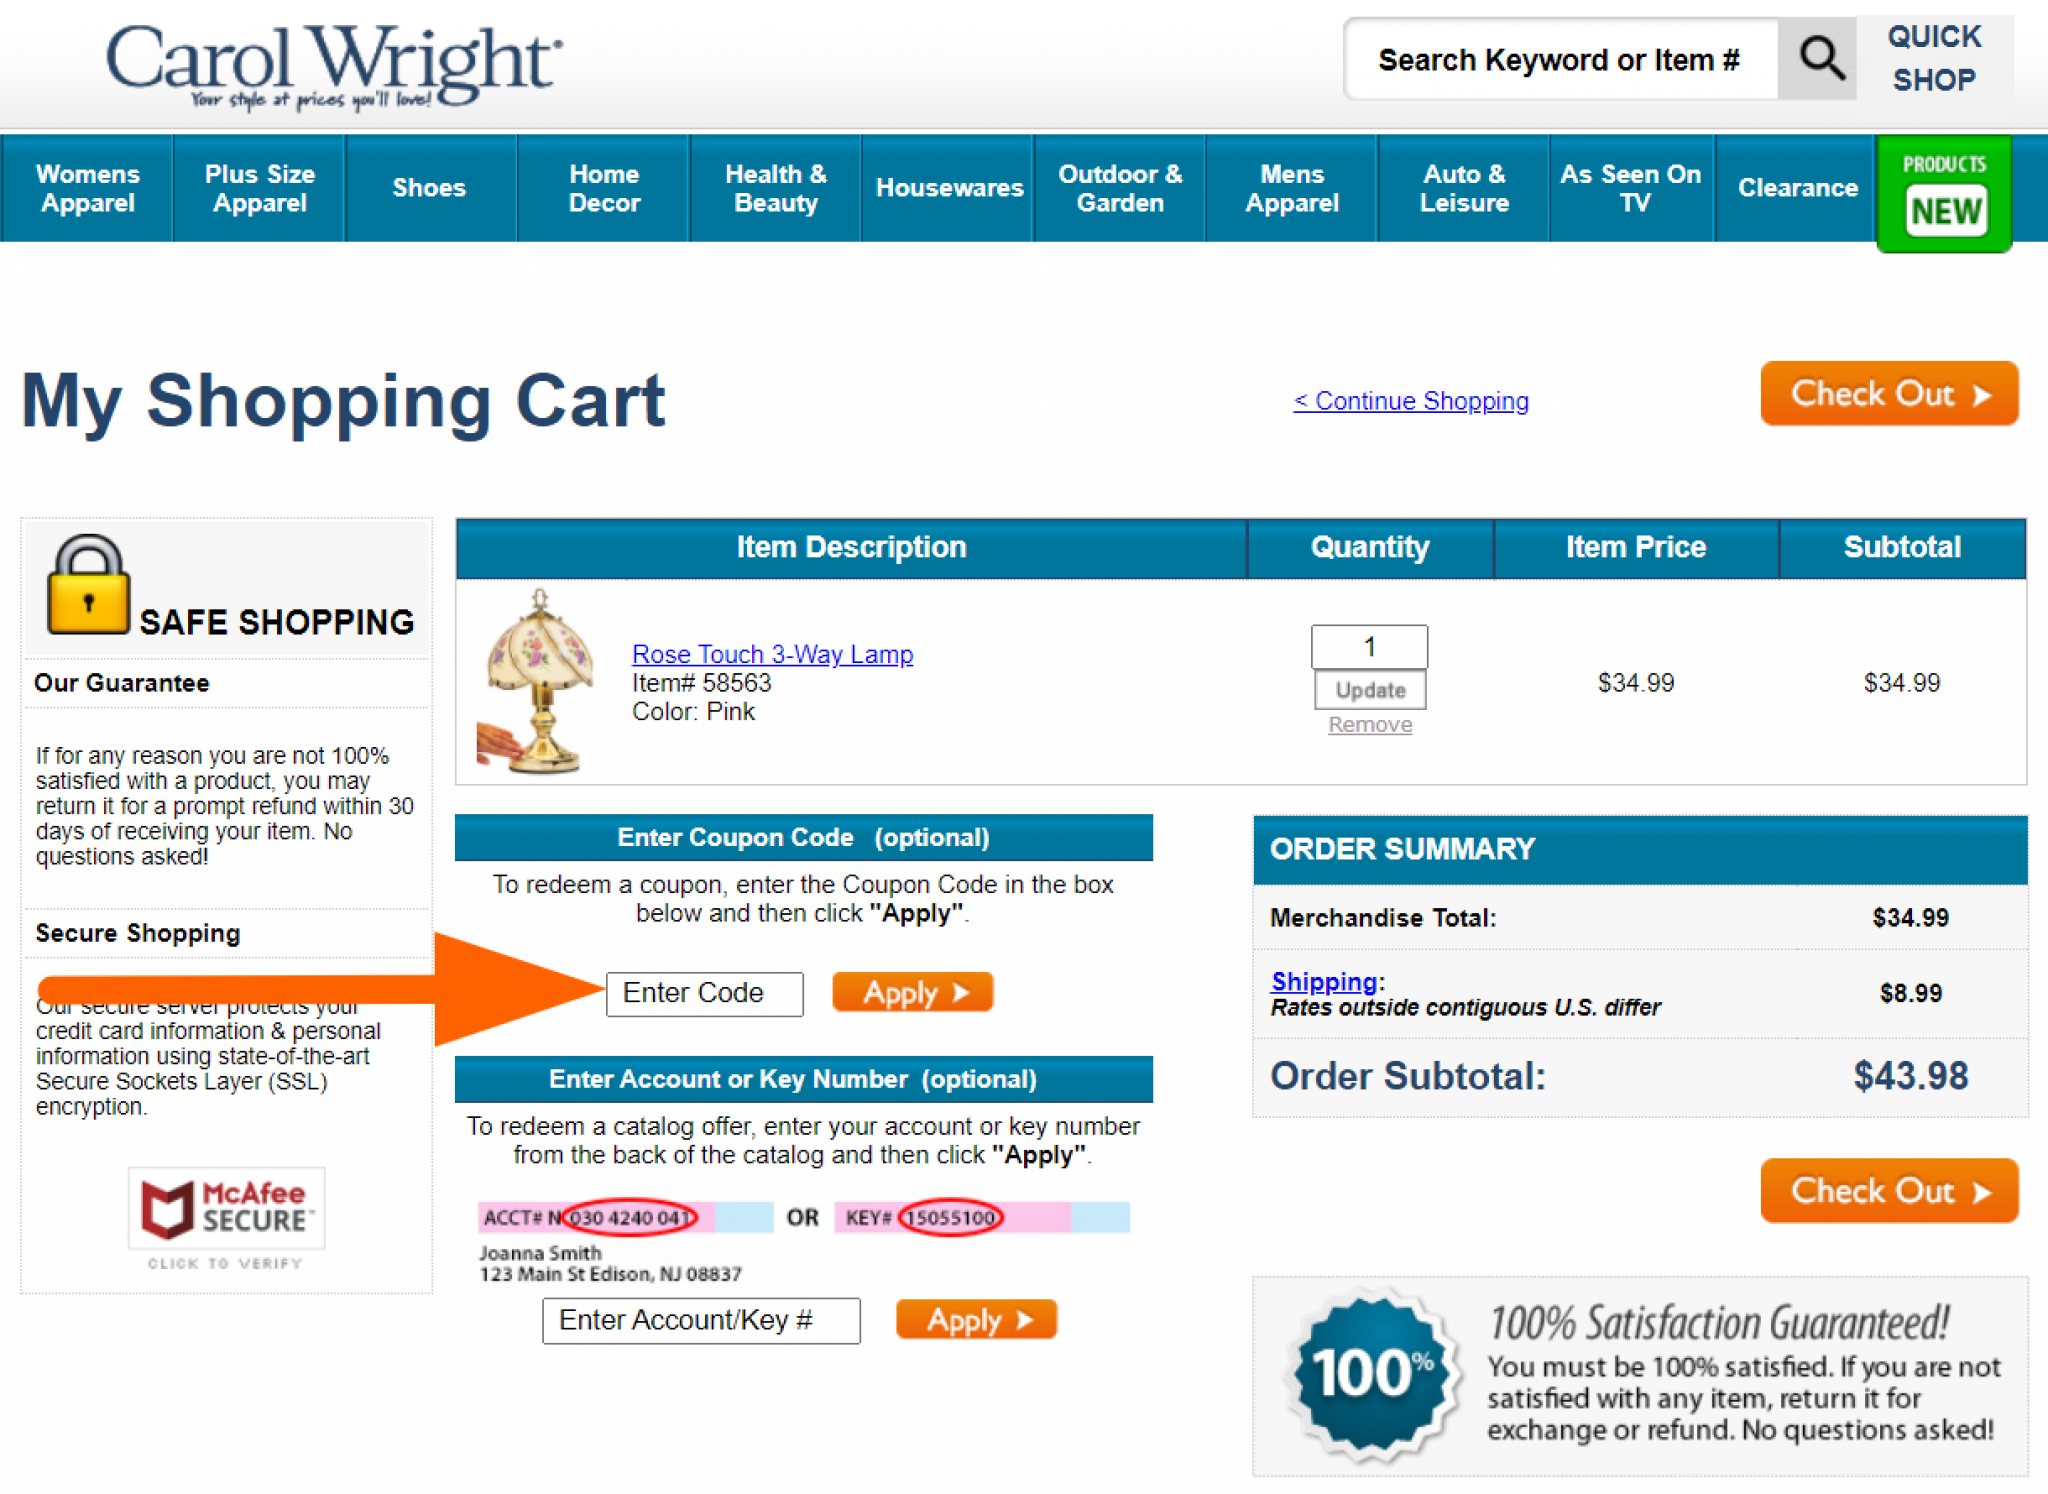 Carol Wright Coupons, Deals & Discount Codes 2022